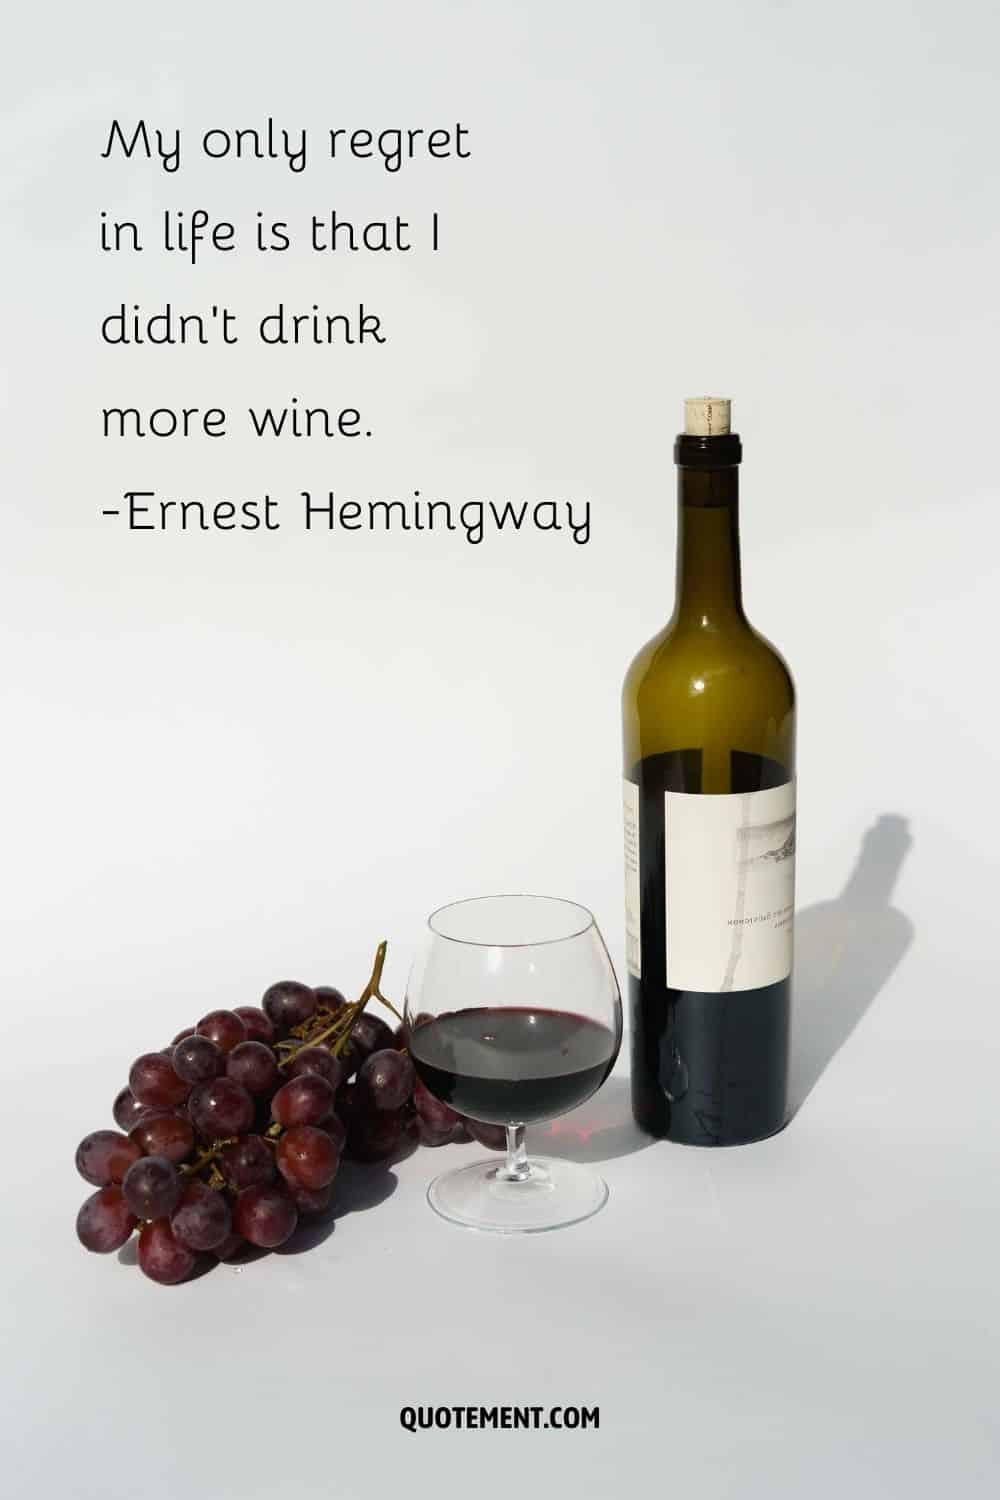 wine and grapes image representing the greatest wine quote